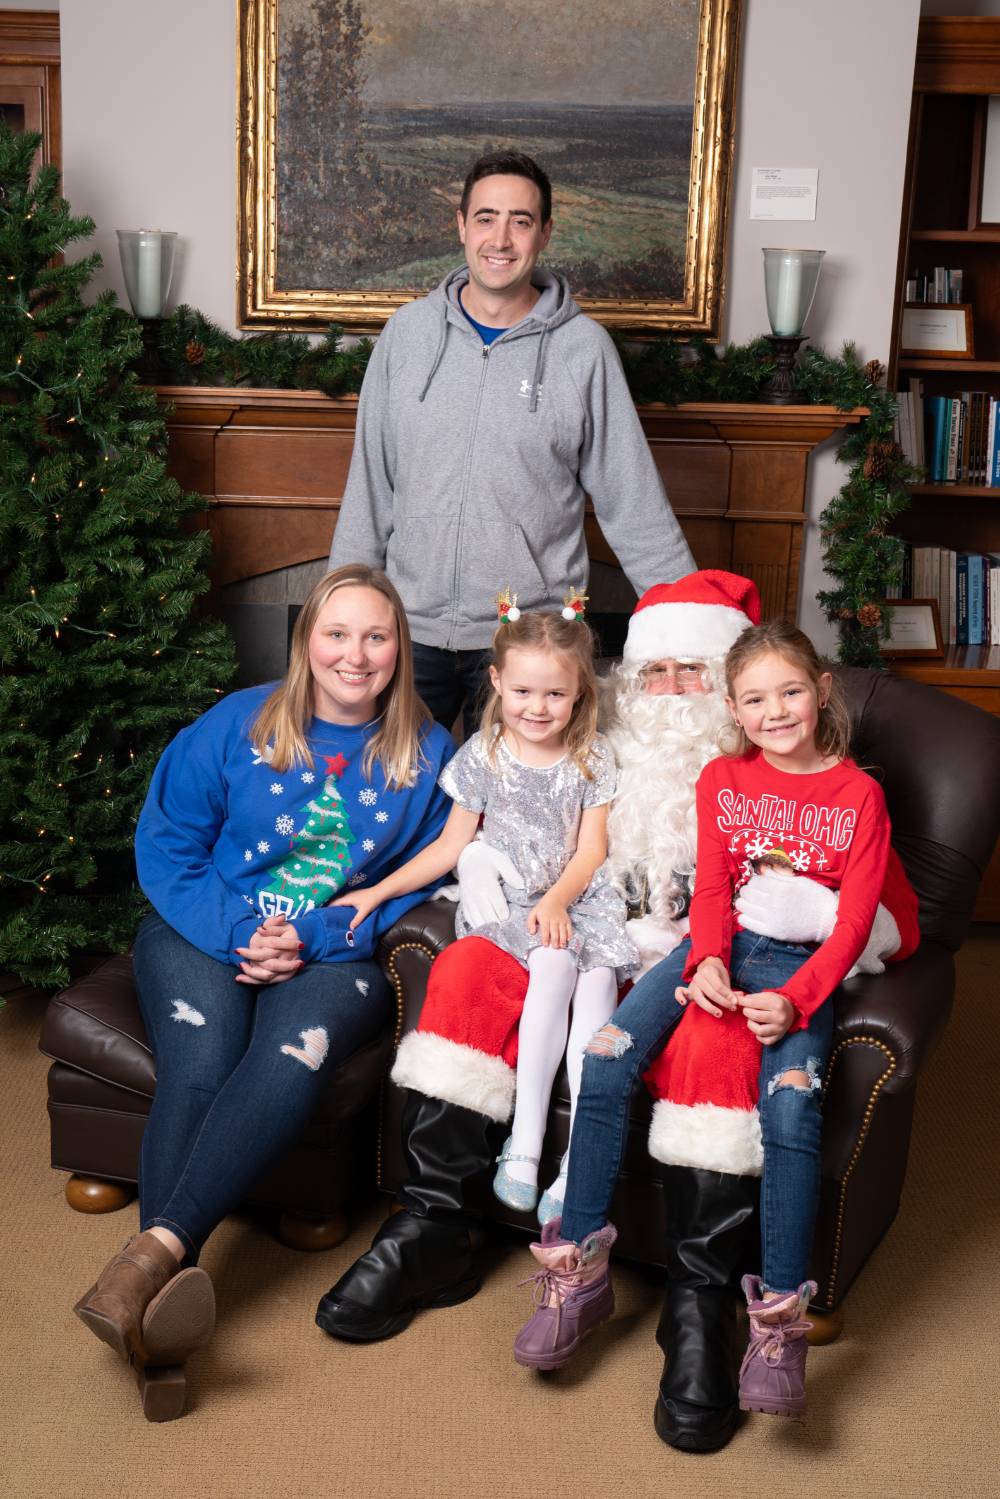 Family of four at the event with Santa.